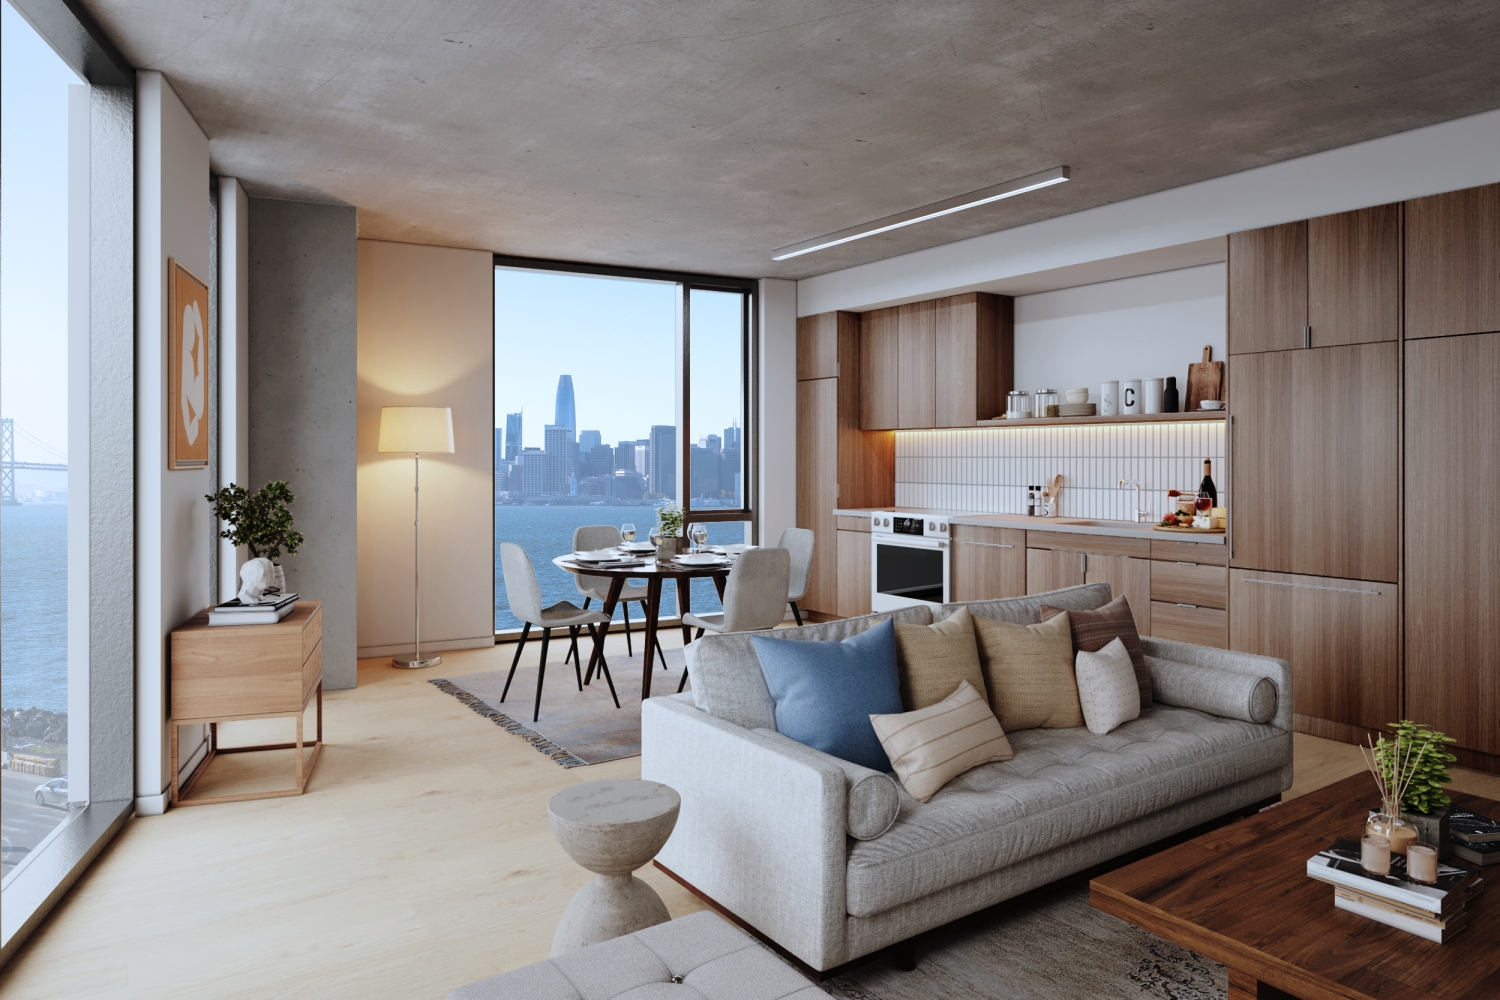 Rendering of a unit living room and kitchen with the view of the bay for Tidal House in Treasure Island, San Francisco, Ca.